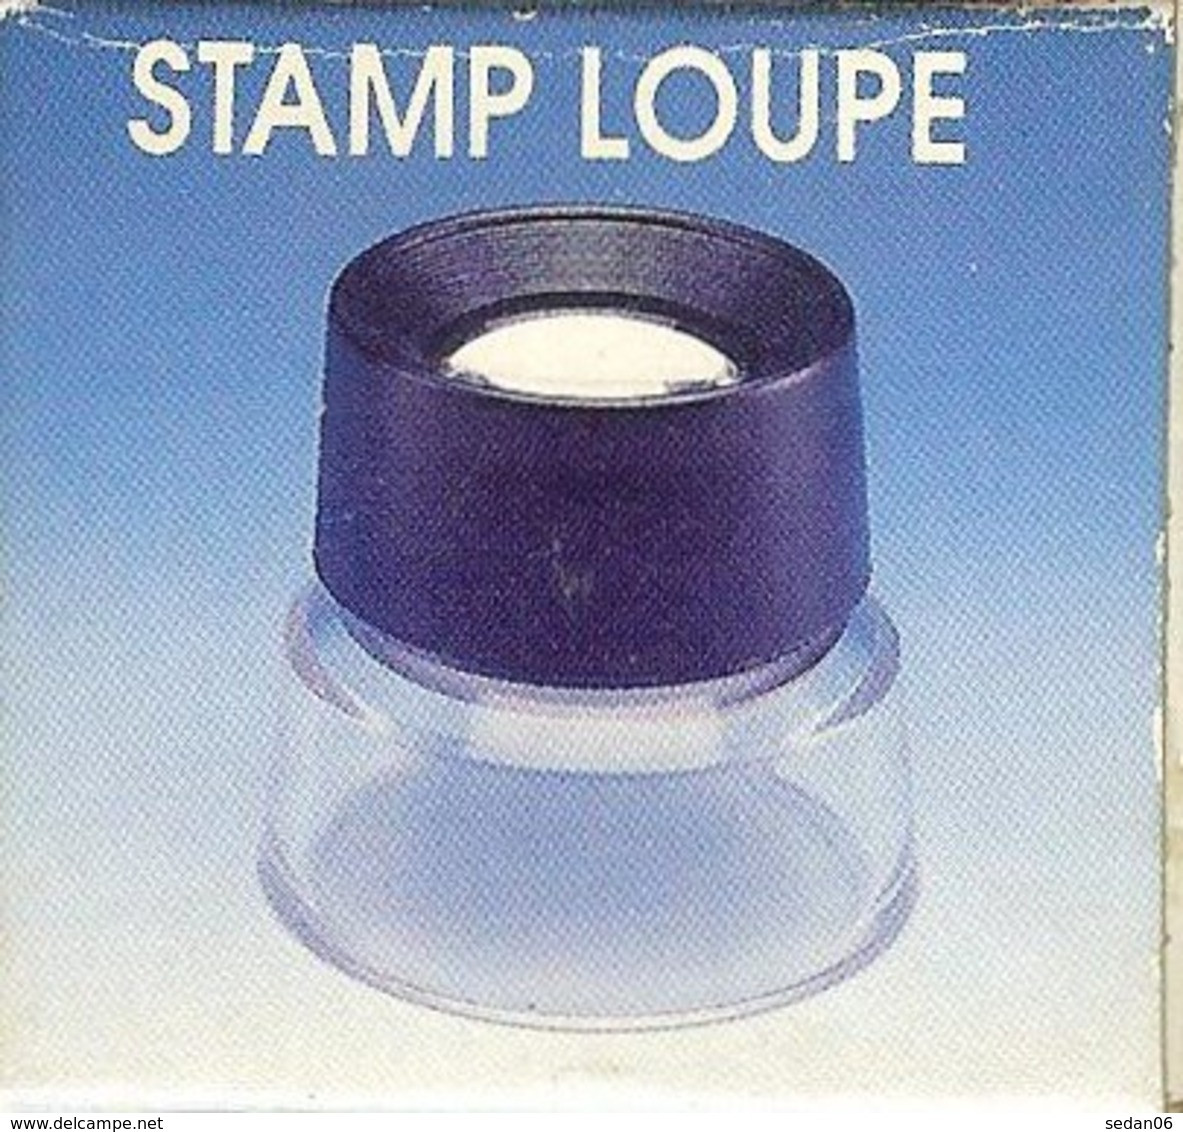 DAVO - LOUPE Sur PIED, Gr.10x - Stamp Tongs, Magnifiers And Microscopes